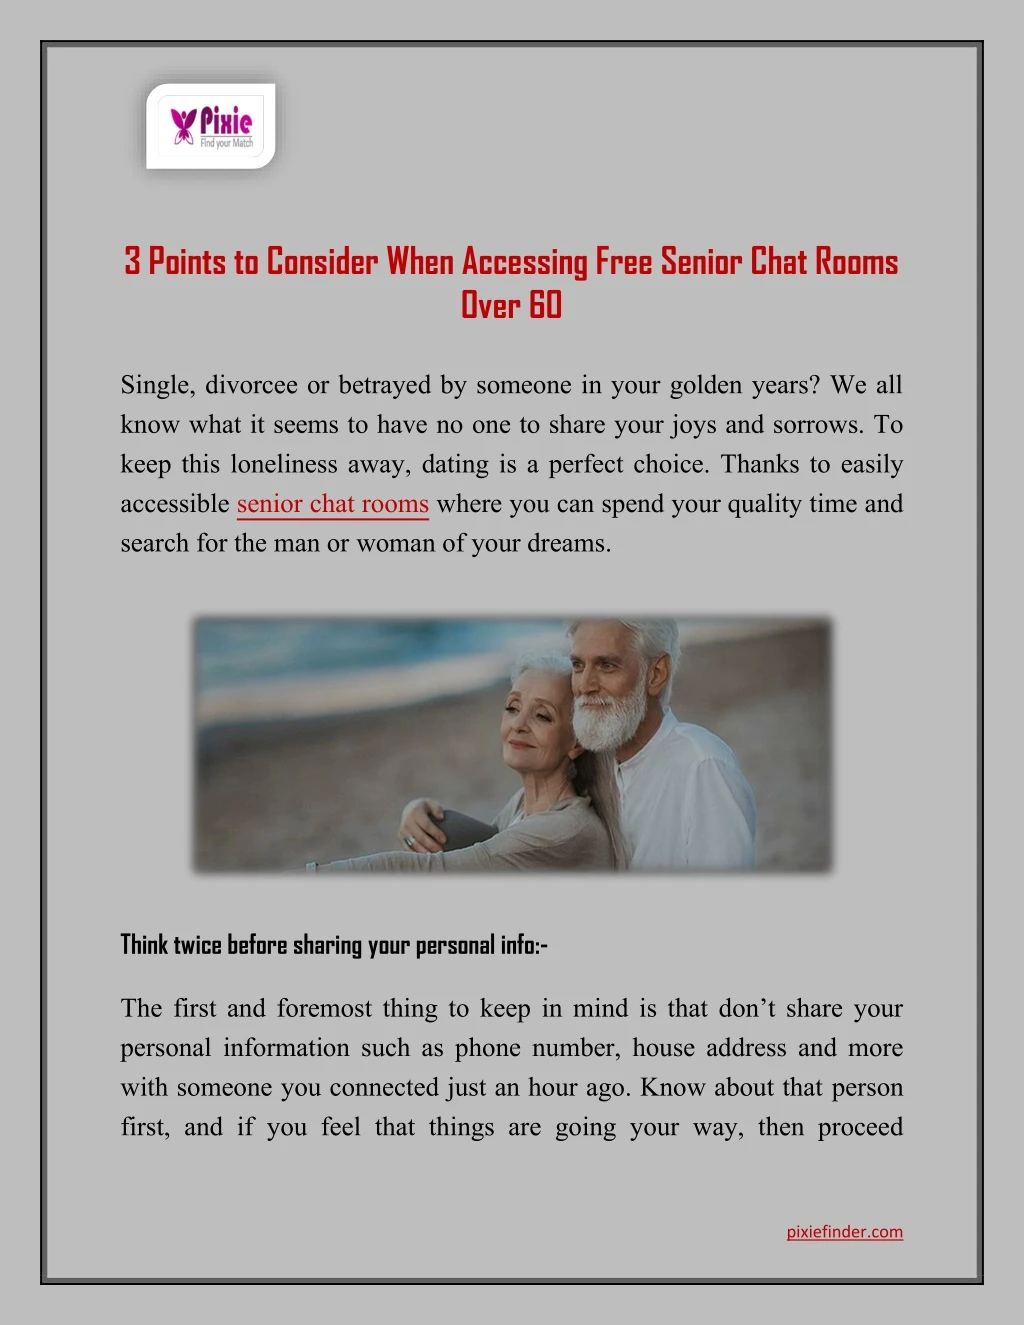 3 points to consider when accessing free senior